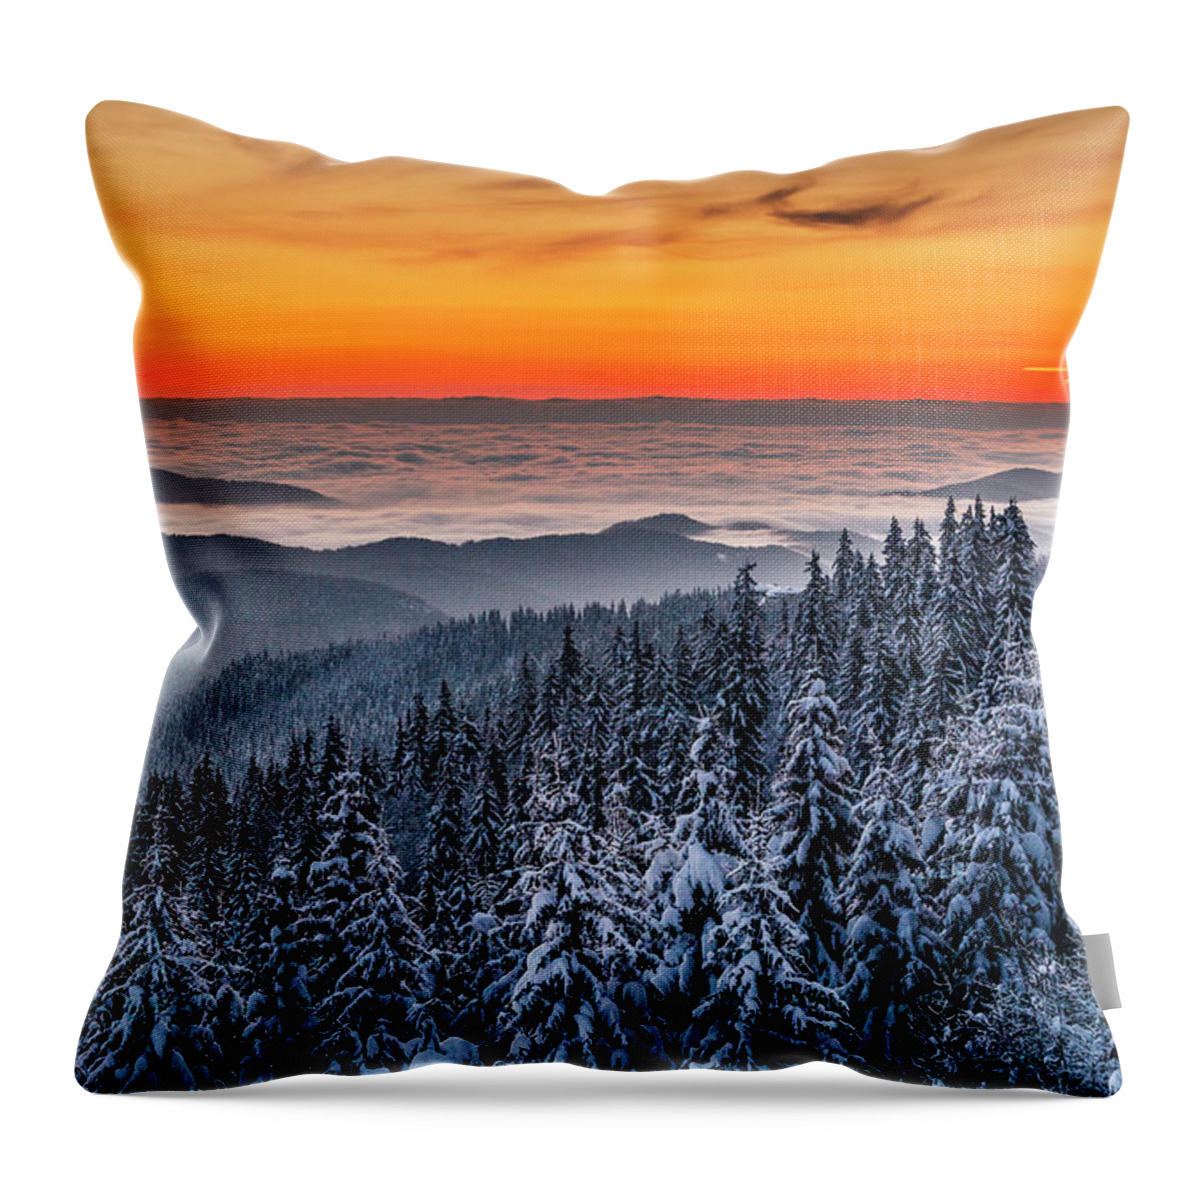 Bulgaria Throw Pillow featuring the photograph Above Ocean Of Clouds by Evgeni Dinev